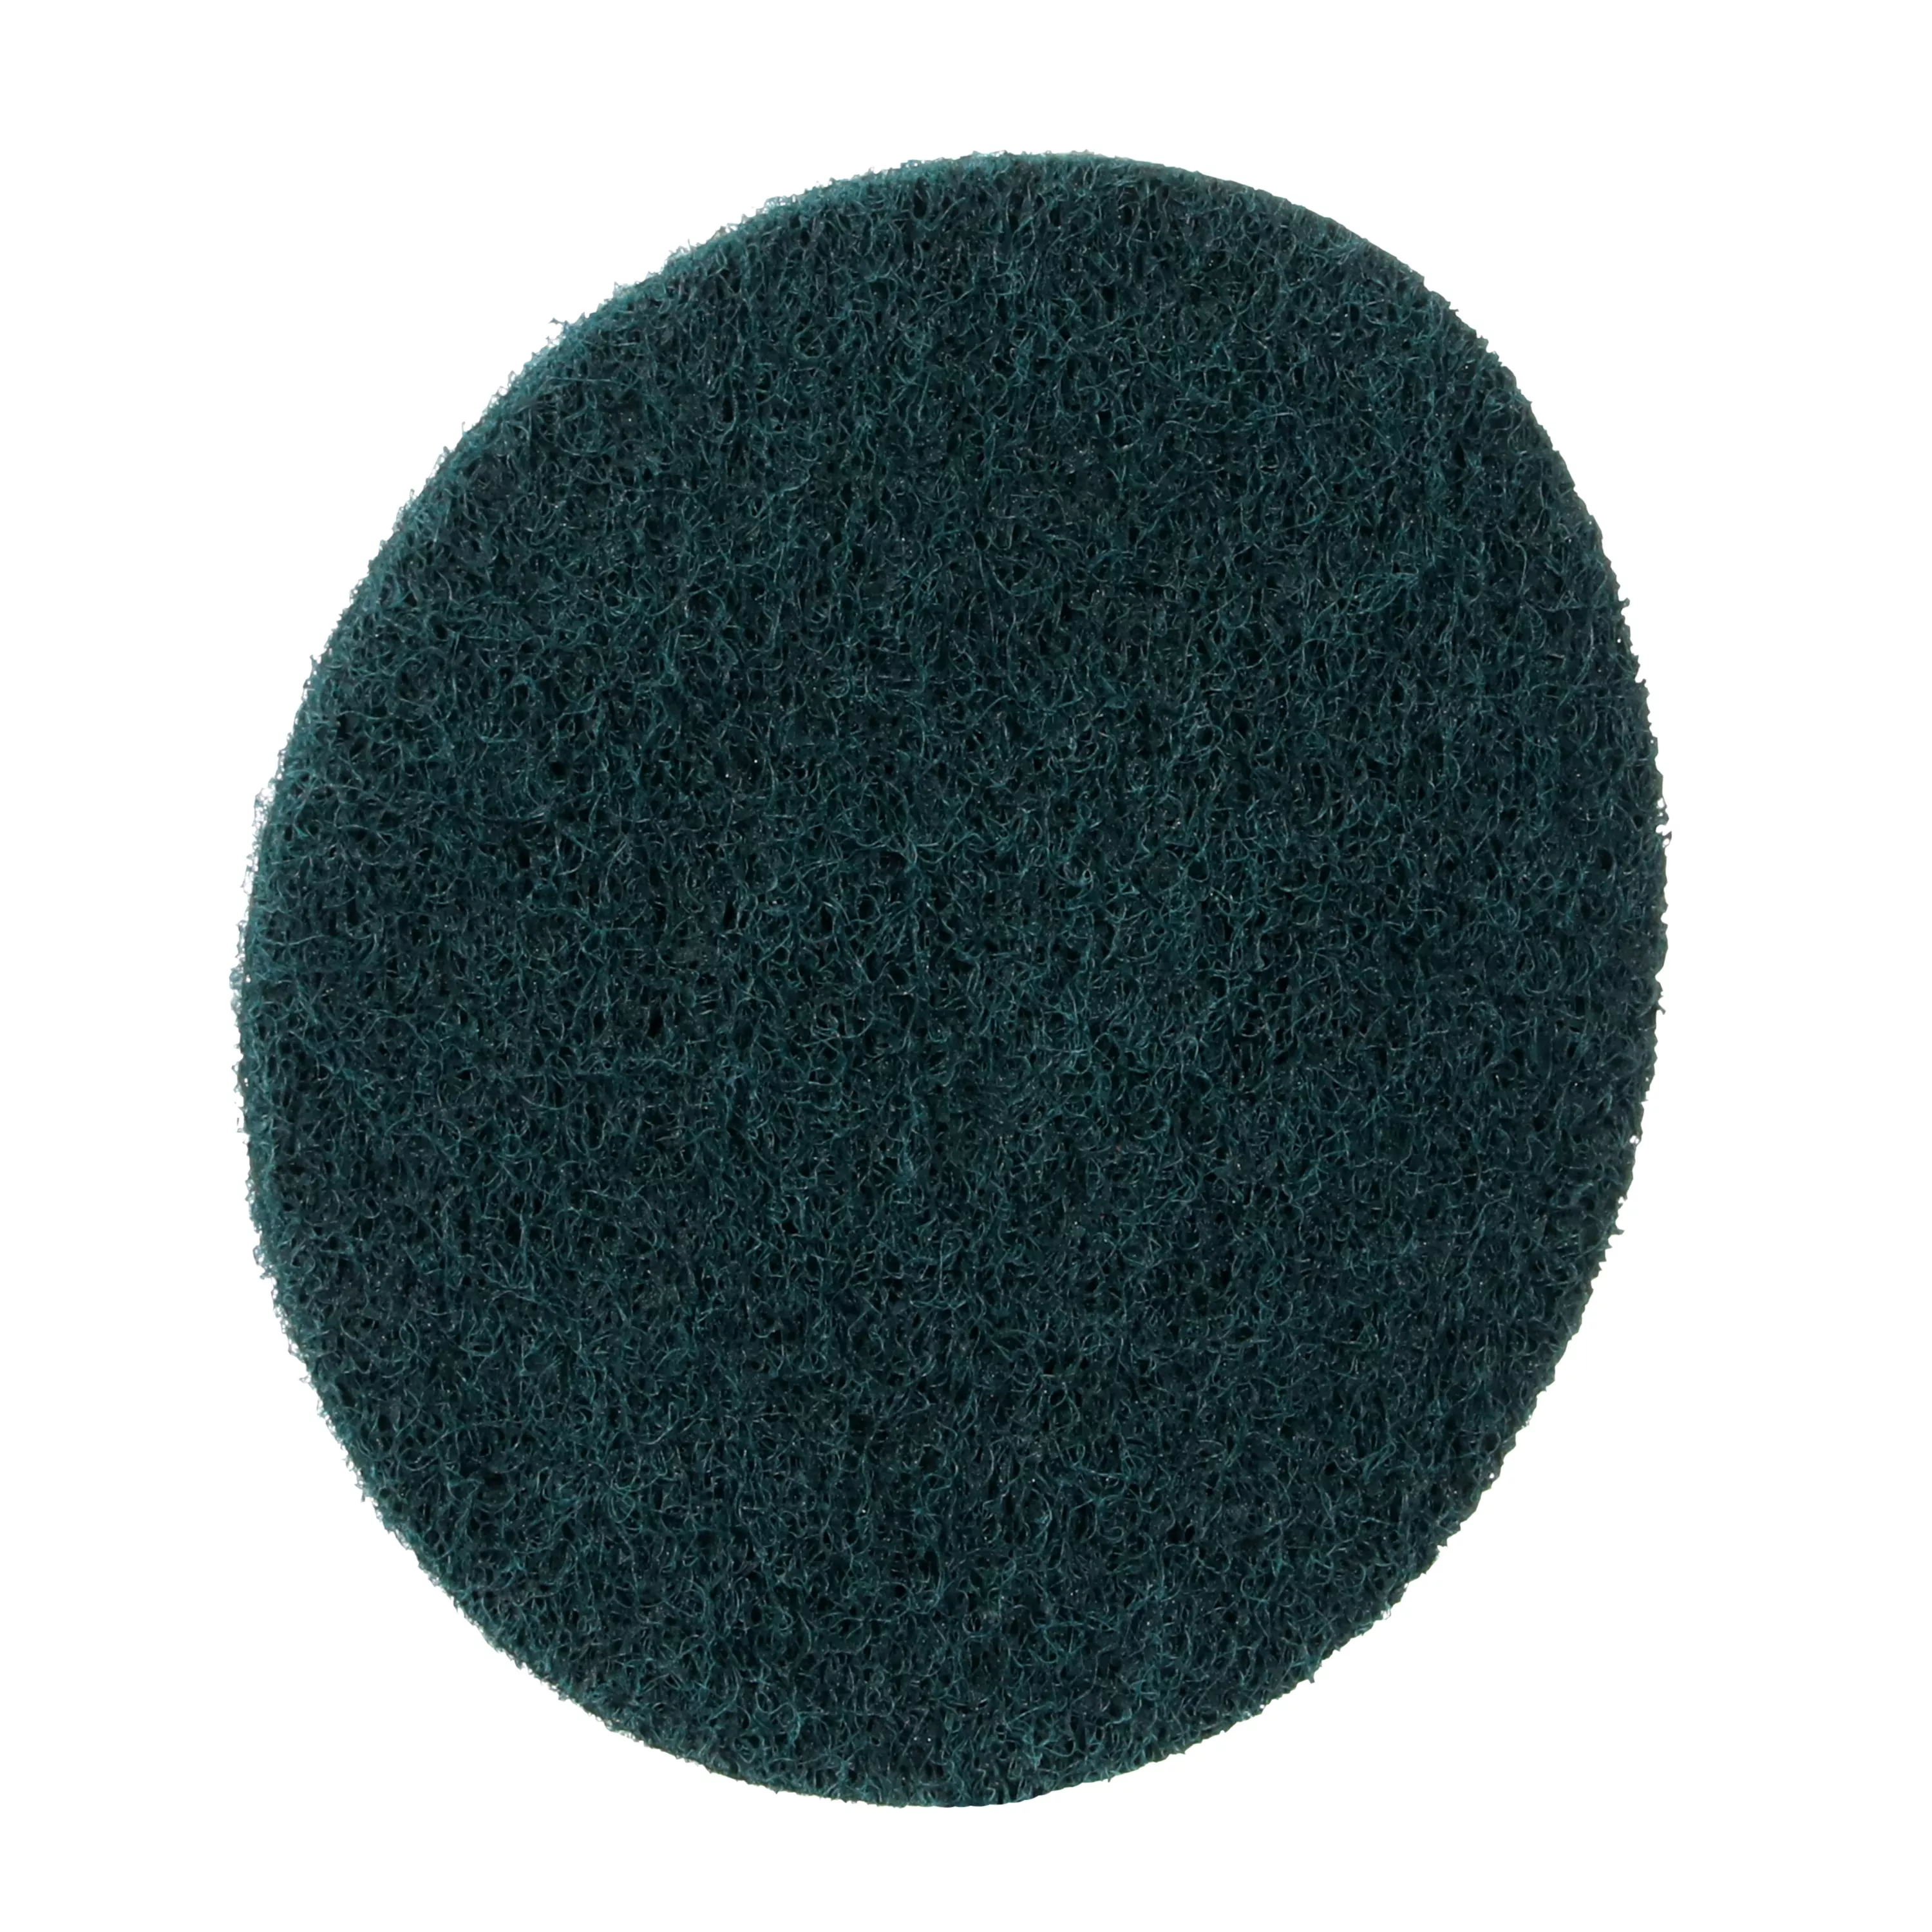 SKU 7100142217 | Standard Abrasives™ Quick Change Surface Conditioning RC Disc